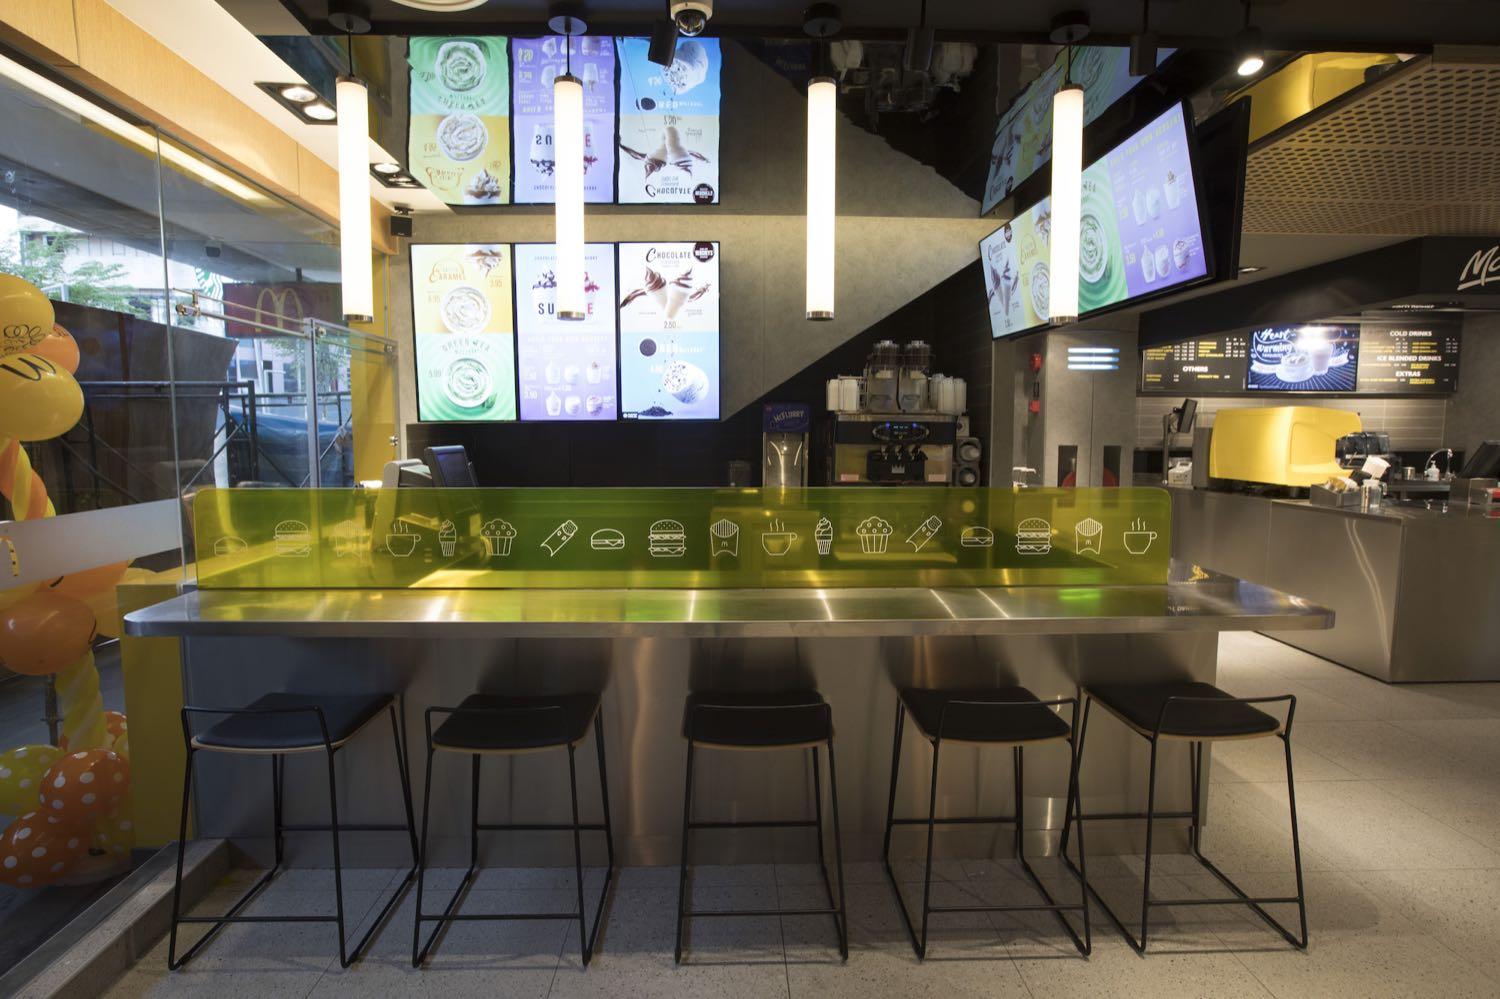 McDonald's Bukit Bintang Just Unveiled a New Modern Look and Netizens Are Lovin' It! - WORLD OF BUZZ 2